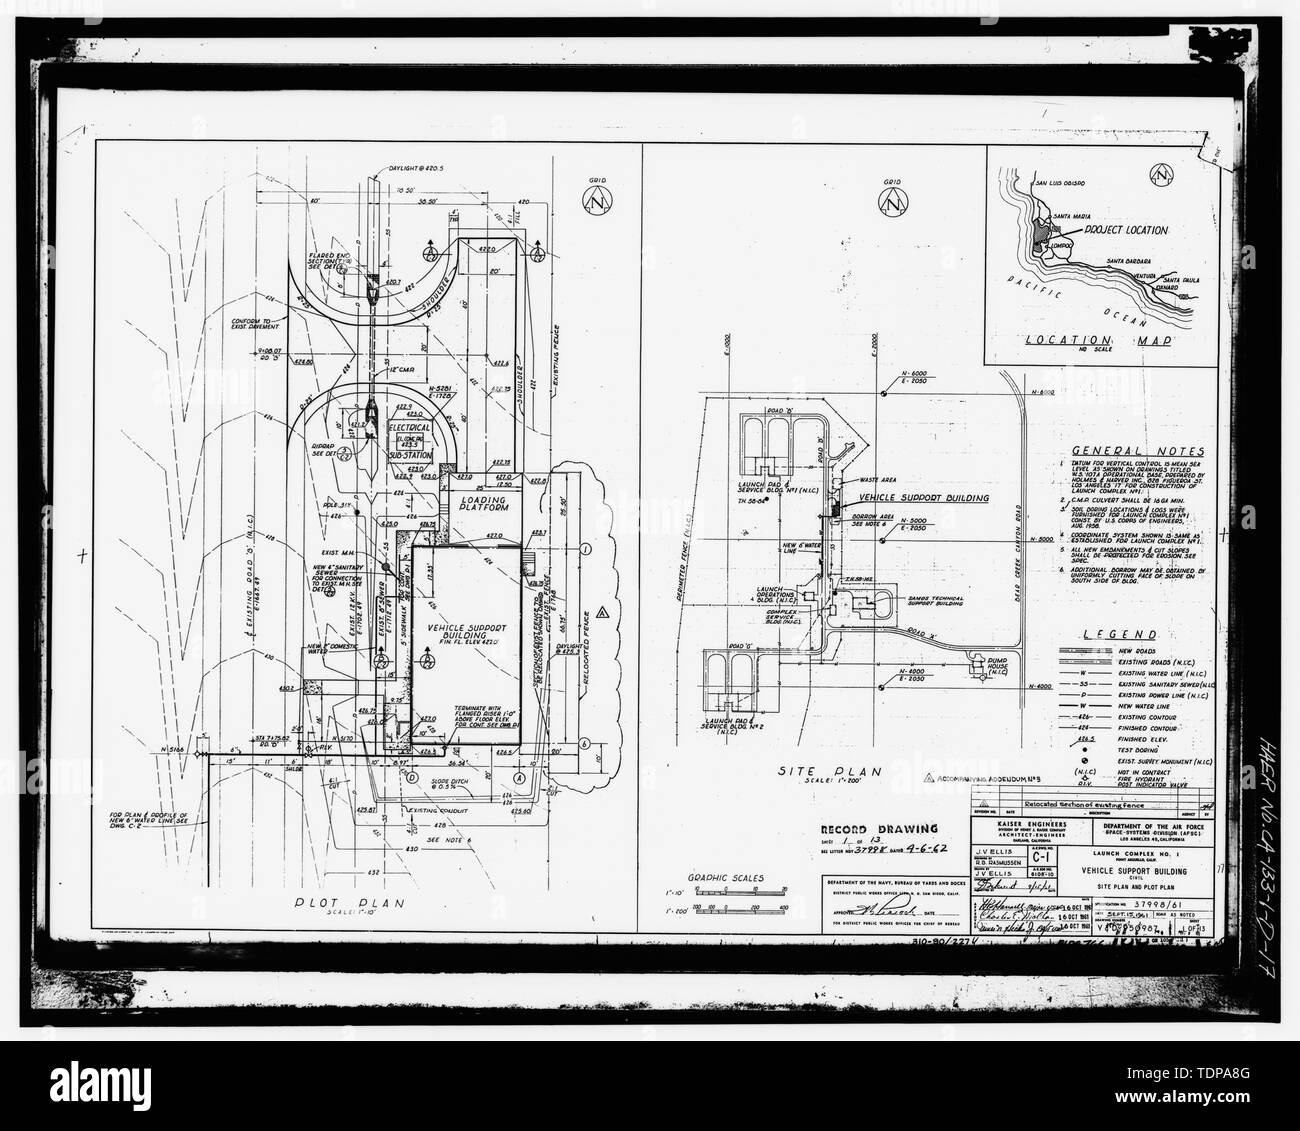 Photocopy Of Drawing 1961 Civil Engineering Drawing By Kaiser Engineers Site Plan Plot Plan And Location Map For Vehicle Support Building Sheet C 1 Vandenberg Air Force Base Space Launch Complex 3